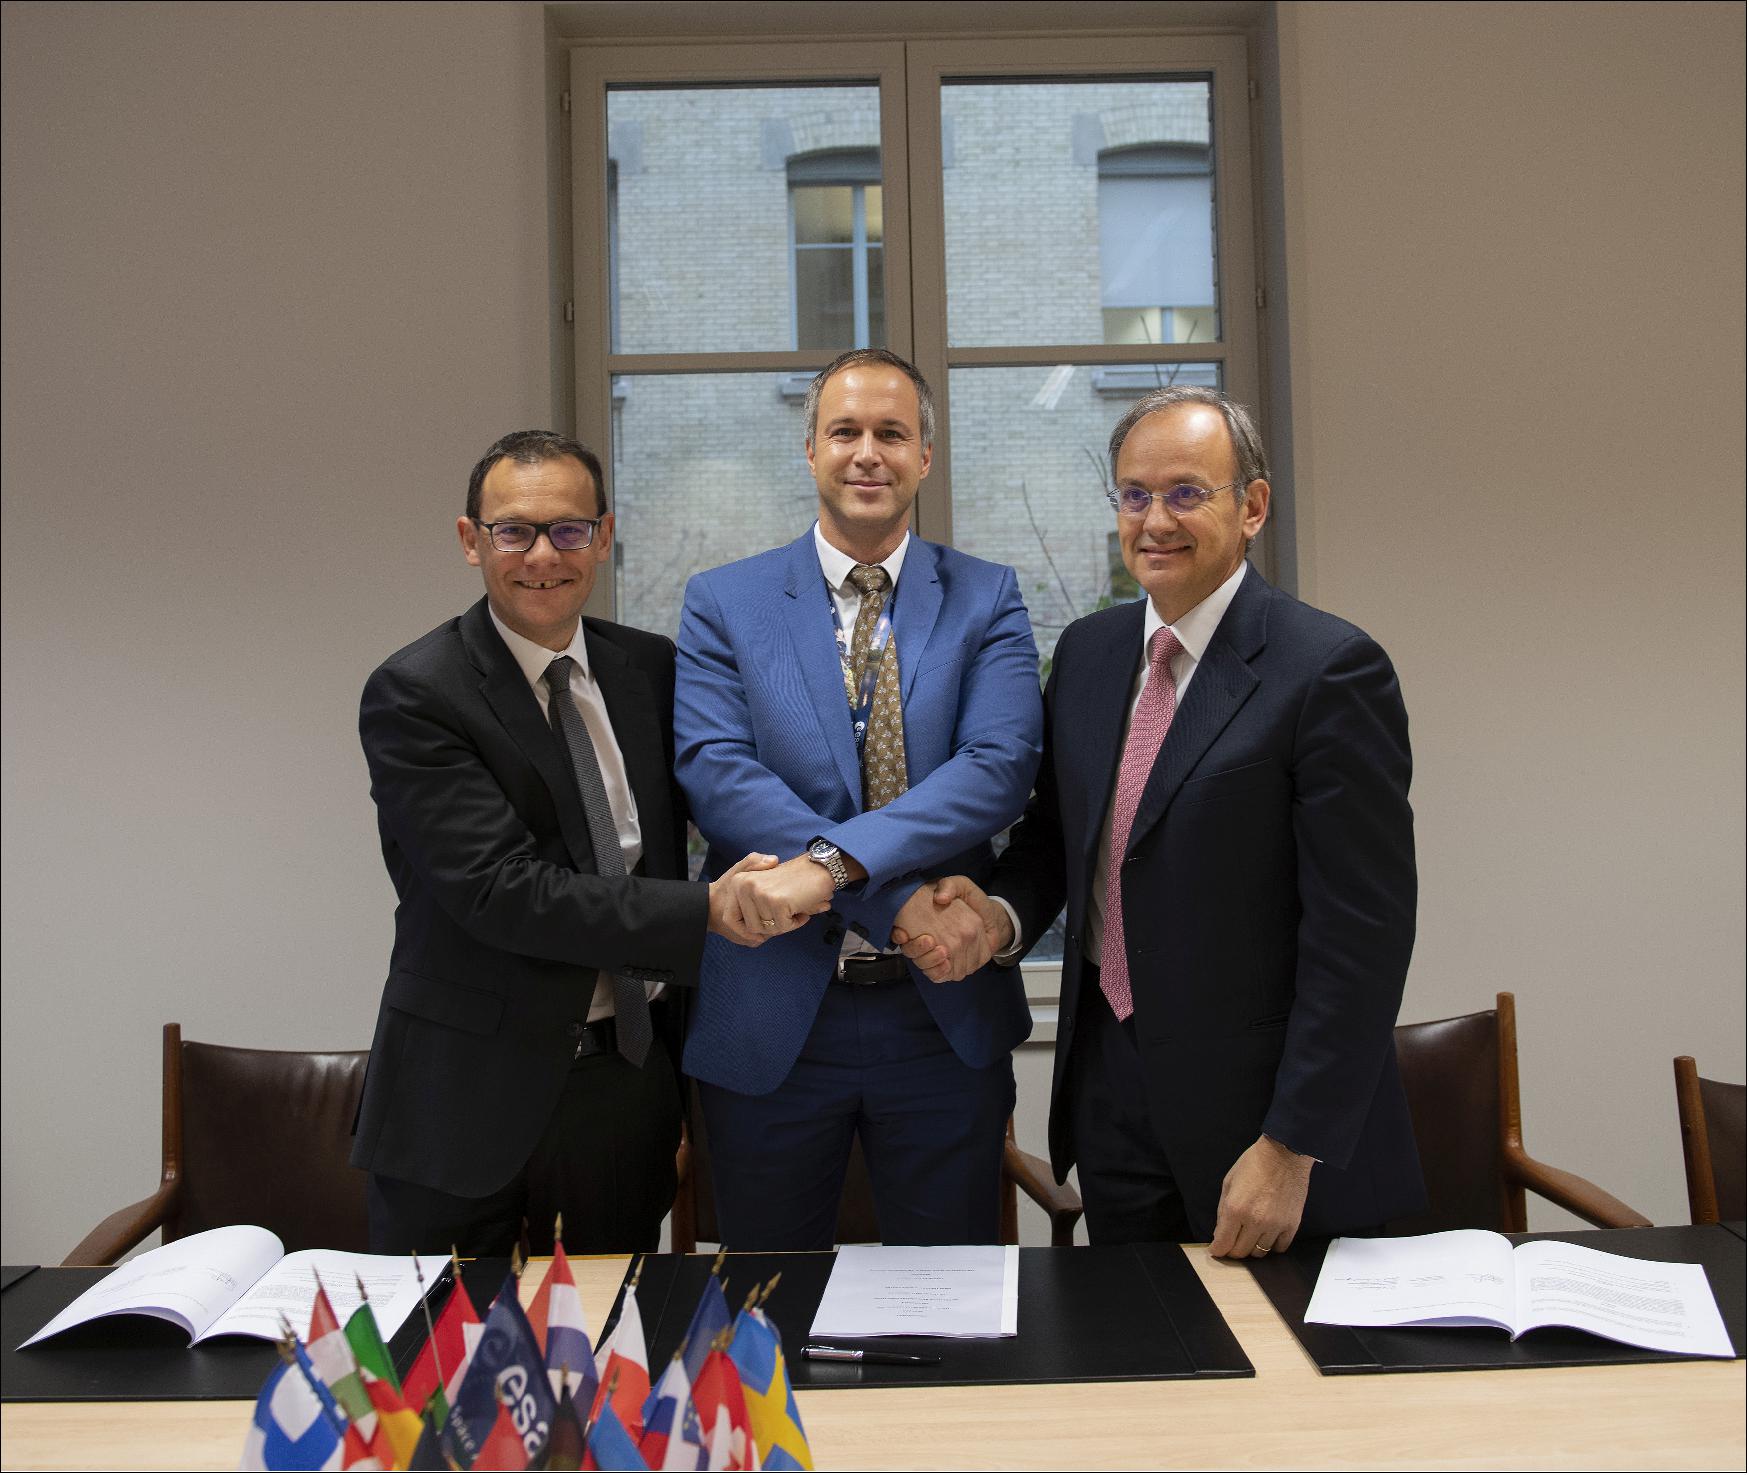 Figure 62: On 20 November 2019, the Vega-C protocol was signed at ESA Headquarters in Paris, France by Daniel Neuenschwander (center), ESA Director of Space Transportation; Stéphane Israel (left), CEO at Arianespace; and Giulio Ranzo (right), CEO at Avio. This protocol will govern the long-lasting exploitation of Vega-C. It covers aspects related to technical and industrial responsibilities in the wide range of areas pertaining to operations such as compliance with high-level requirements over the lifetime of both launchers, launch authorization, configuration management, and maintenance of various assets (image credit: ESA)